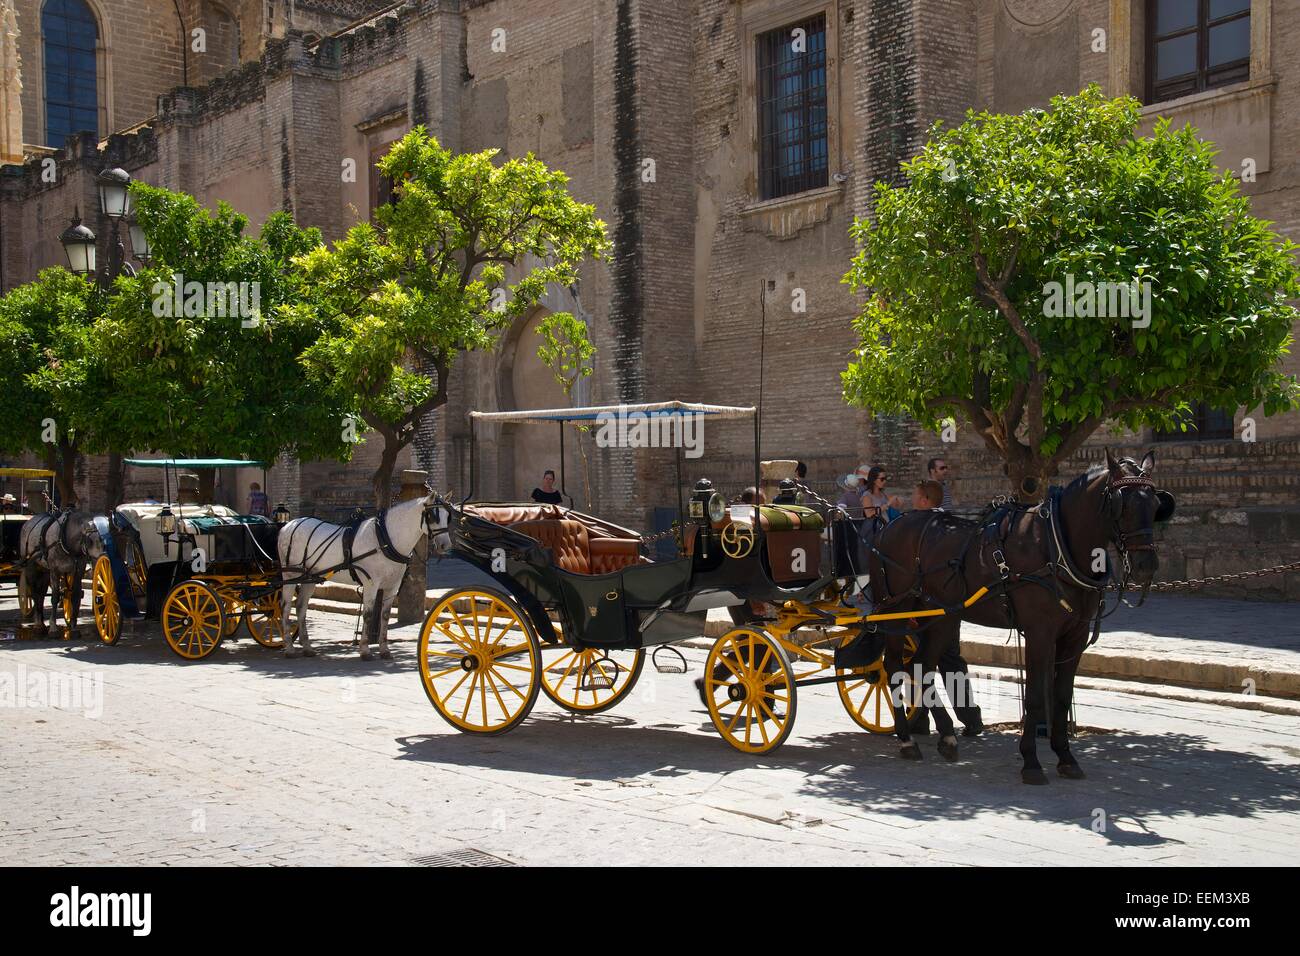 Carriages in the old town, Barrio Santa Cruz, Seville, Andalucía, Spain Stock Photo